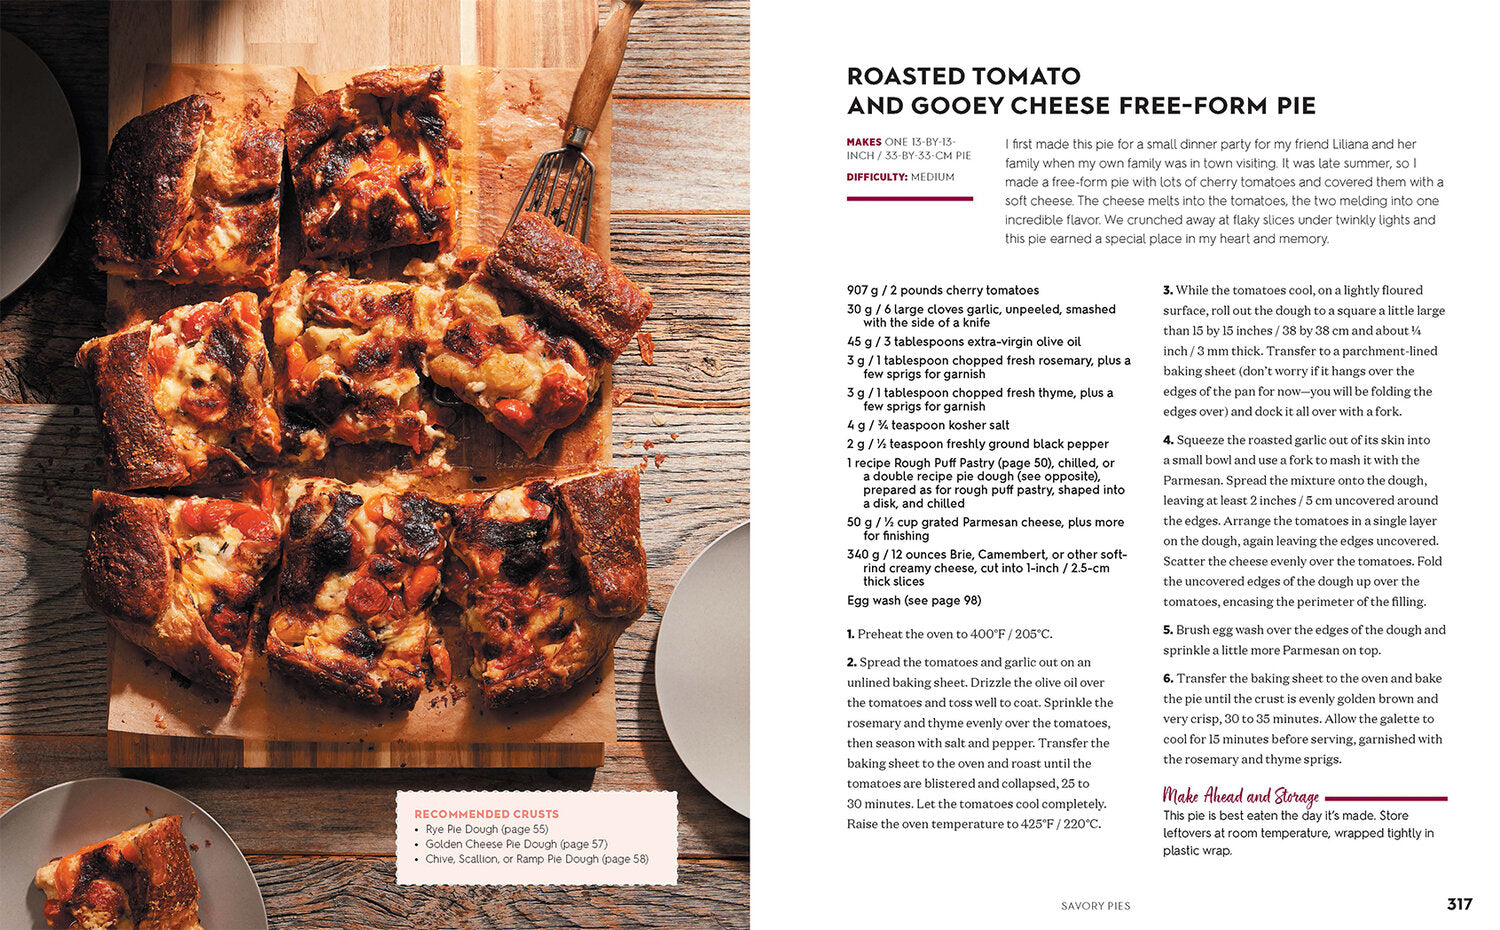 inside pages of book with photo and recipe for roasted tomato and gooey free-form pie.